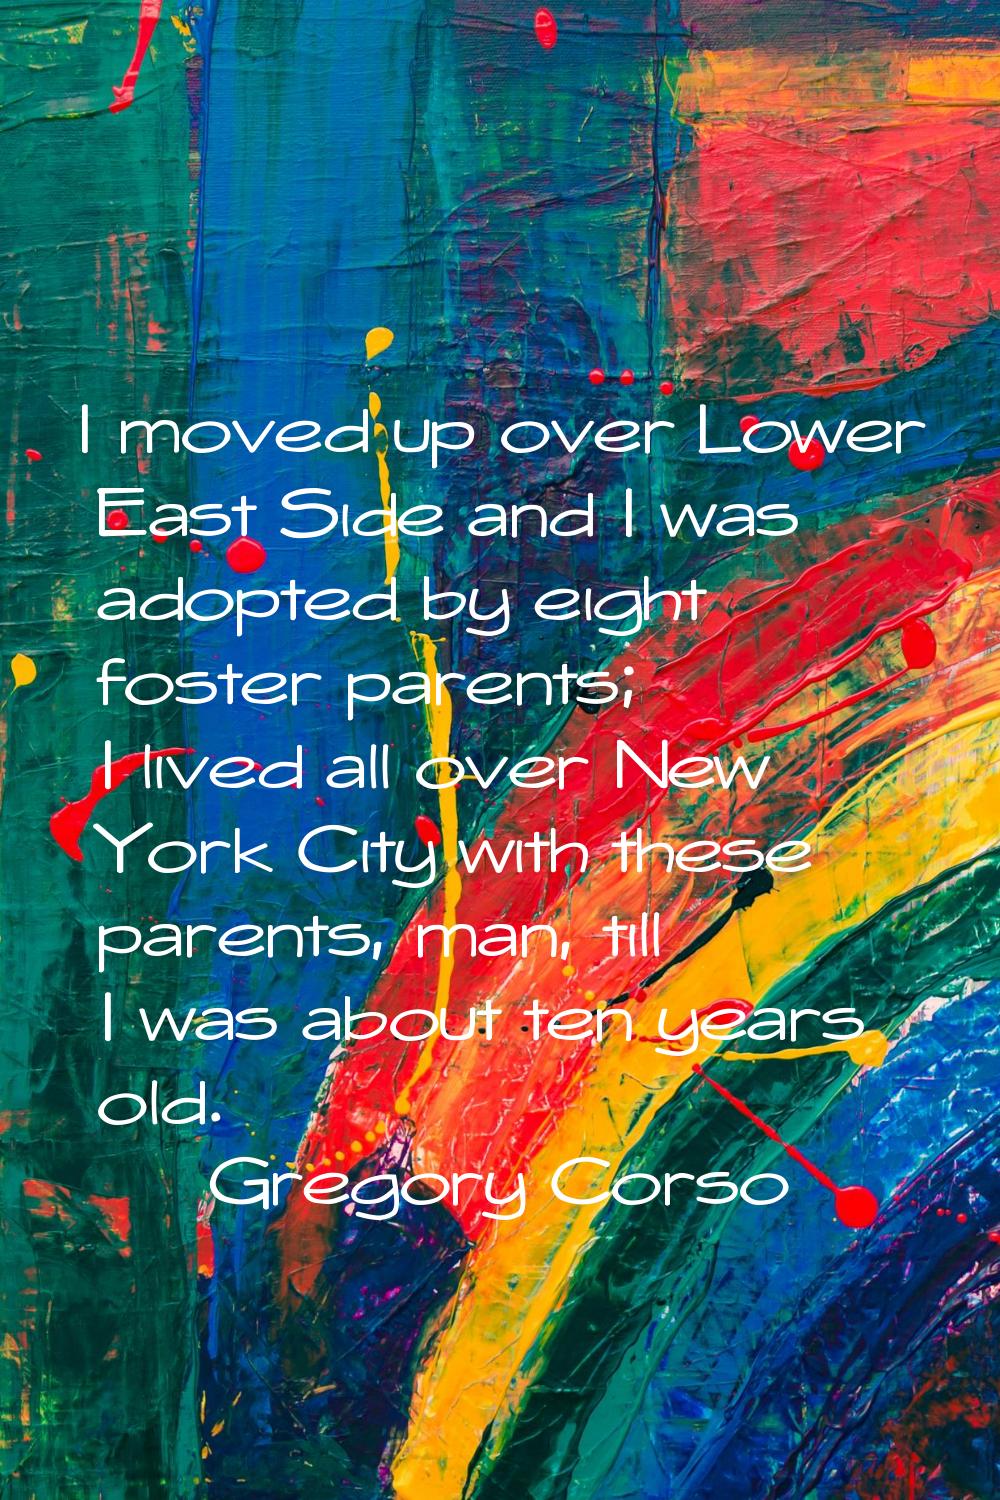 I moved up over Lower East Side and I was adopted by eight foster parents; I lived all over New Yor